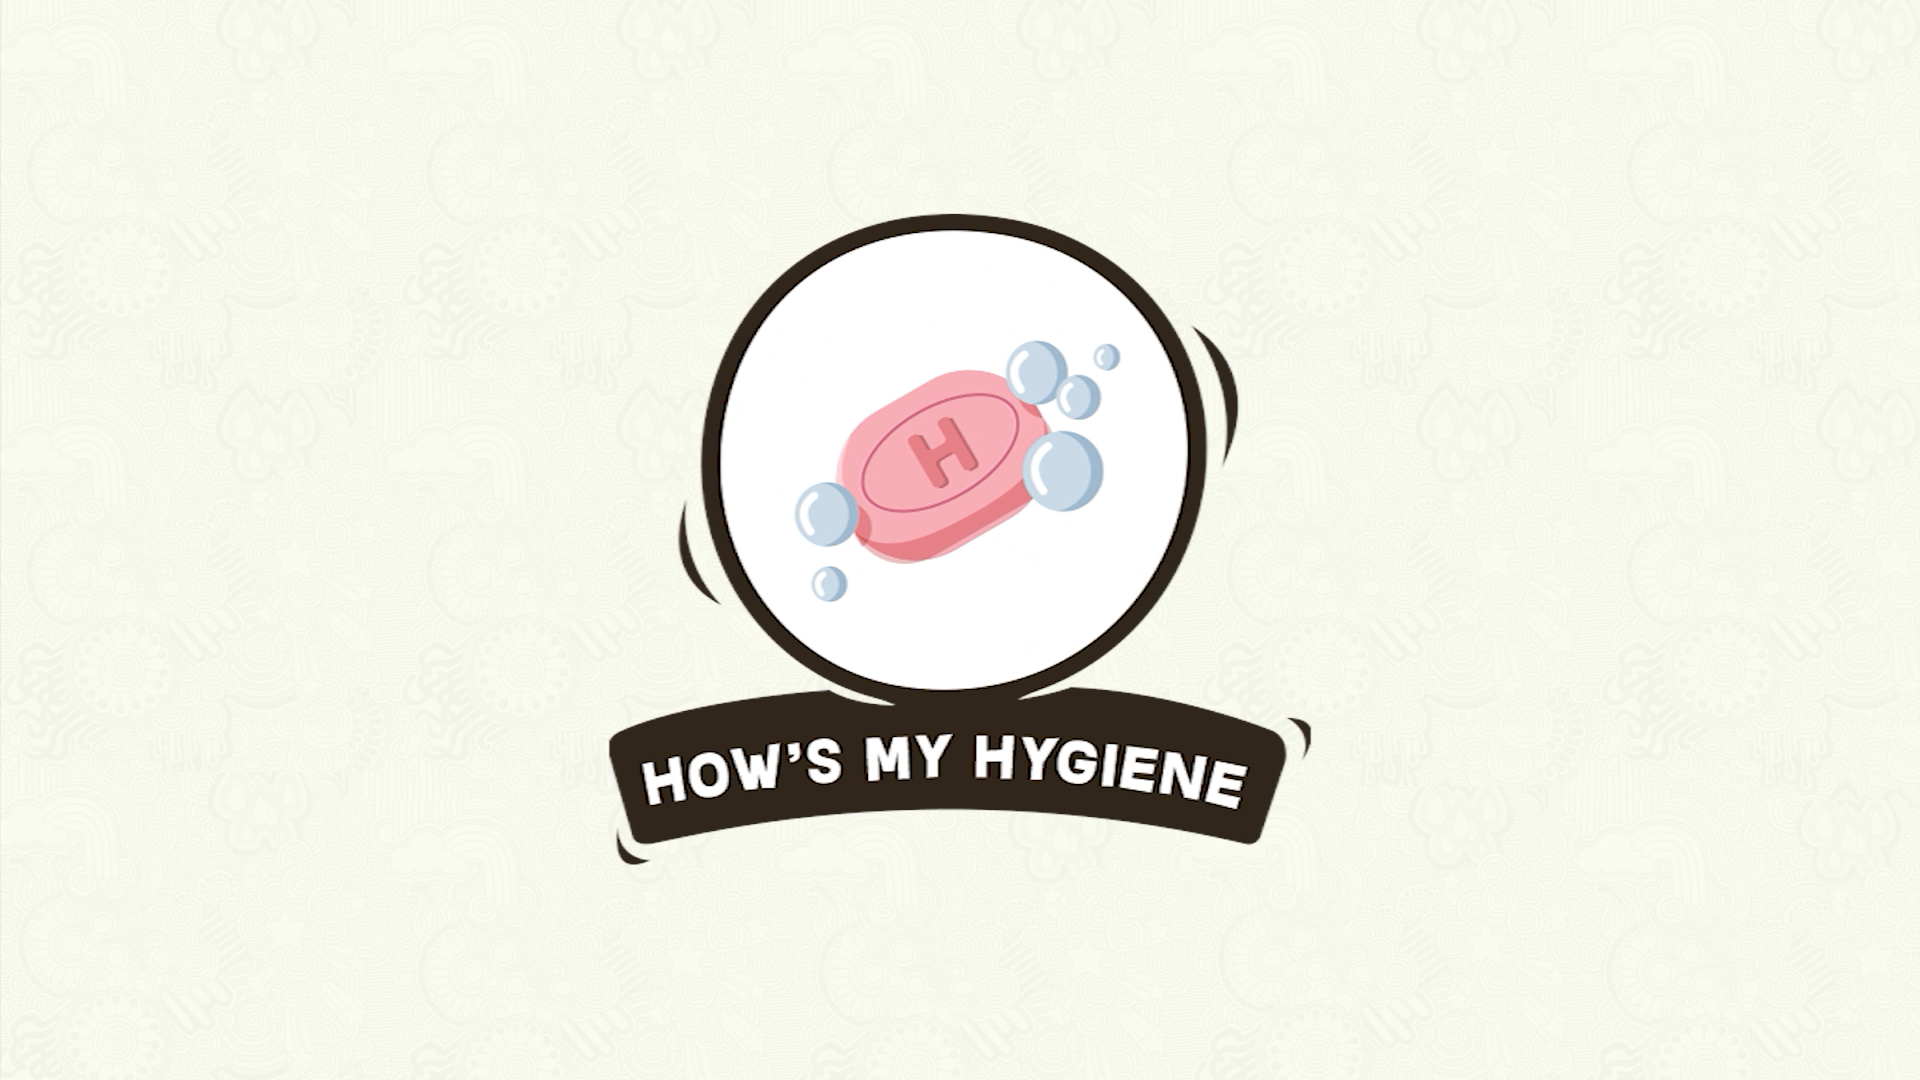 Teaching High School Students About the Importance of Good Hygiene